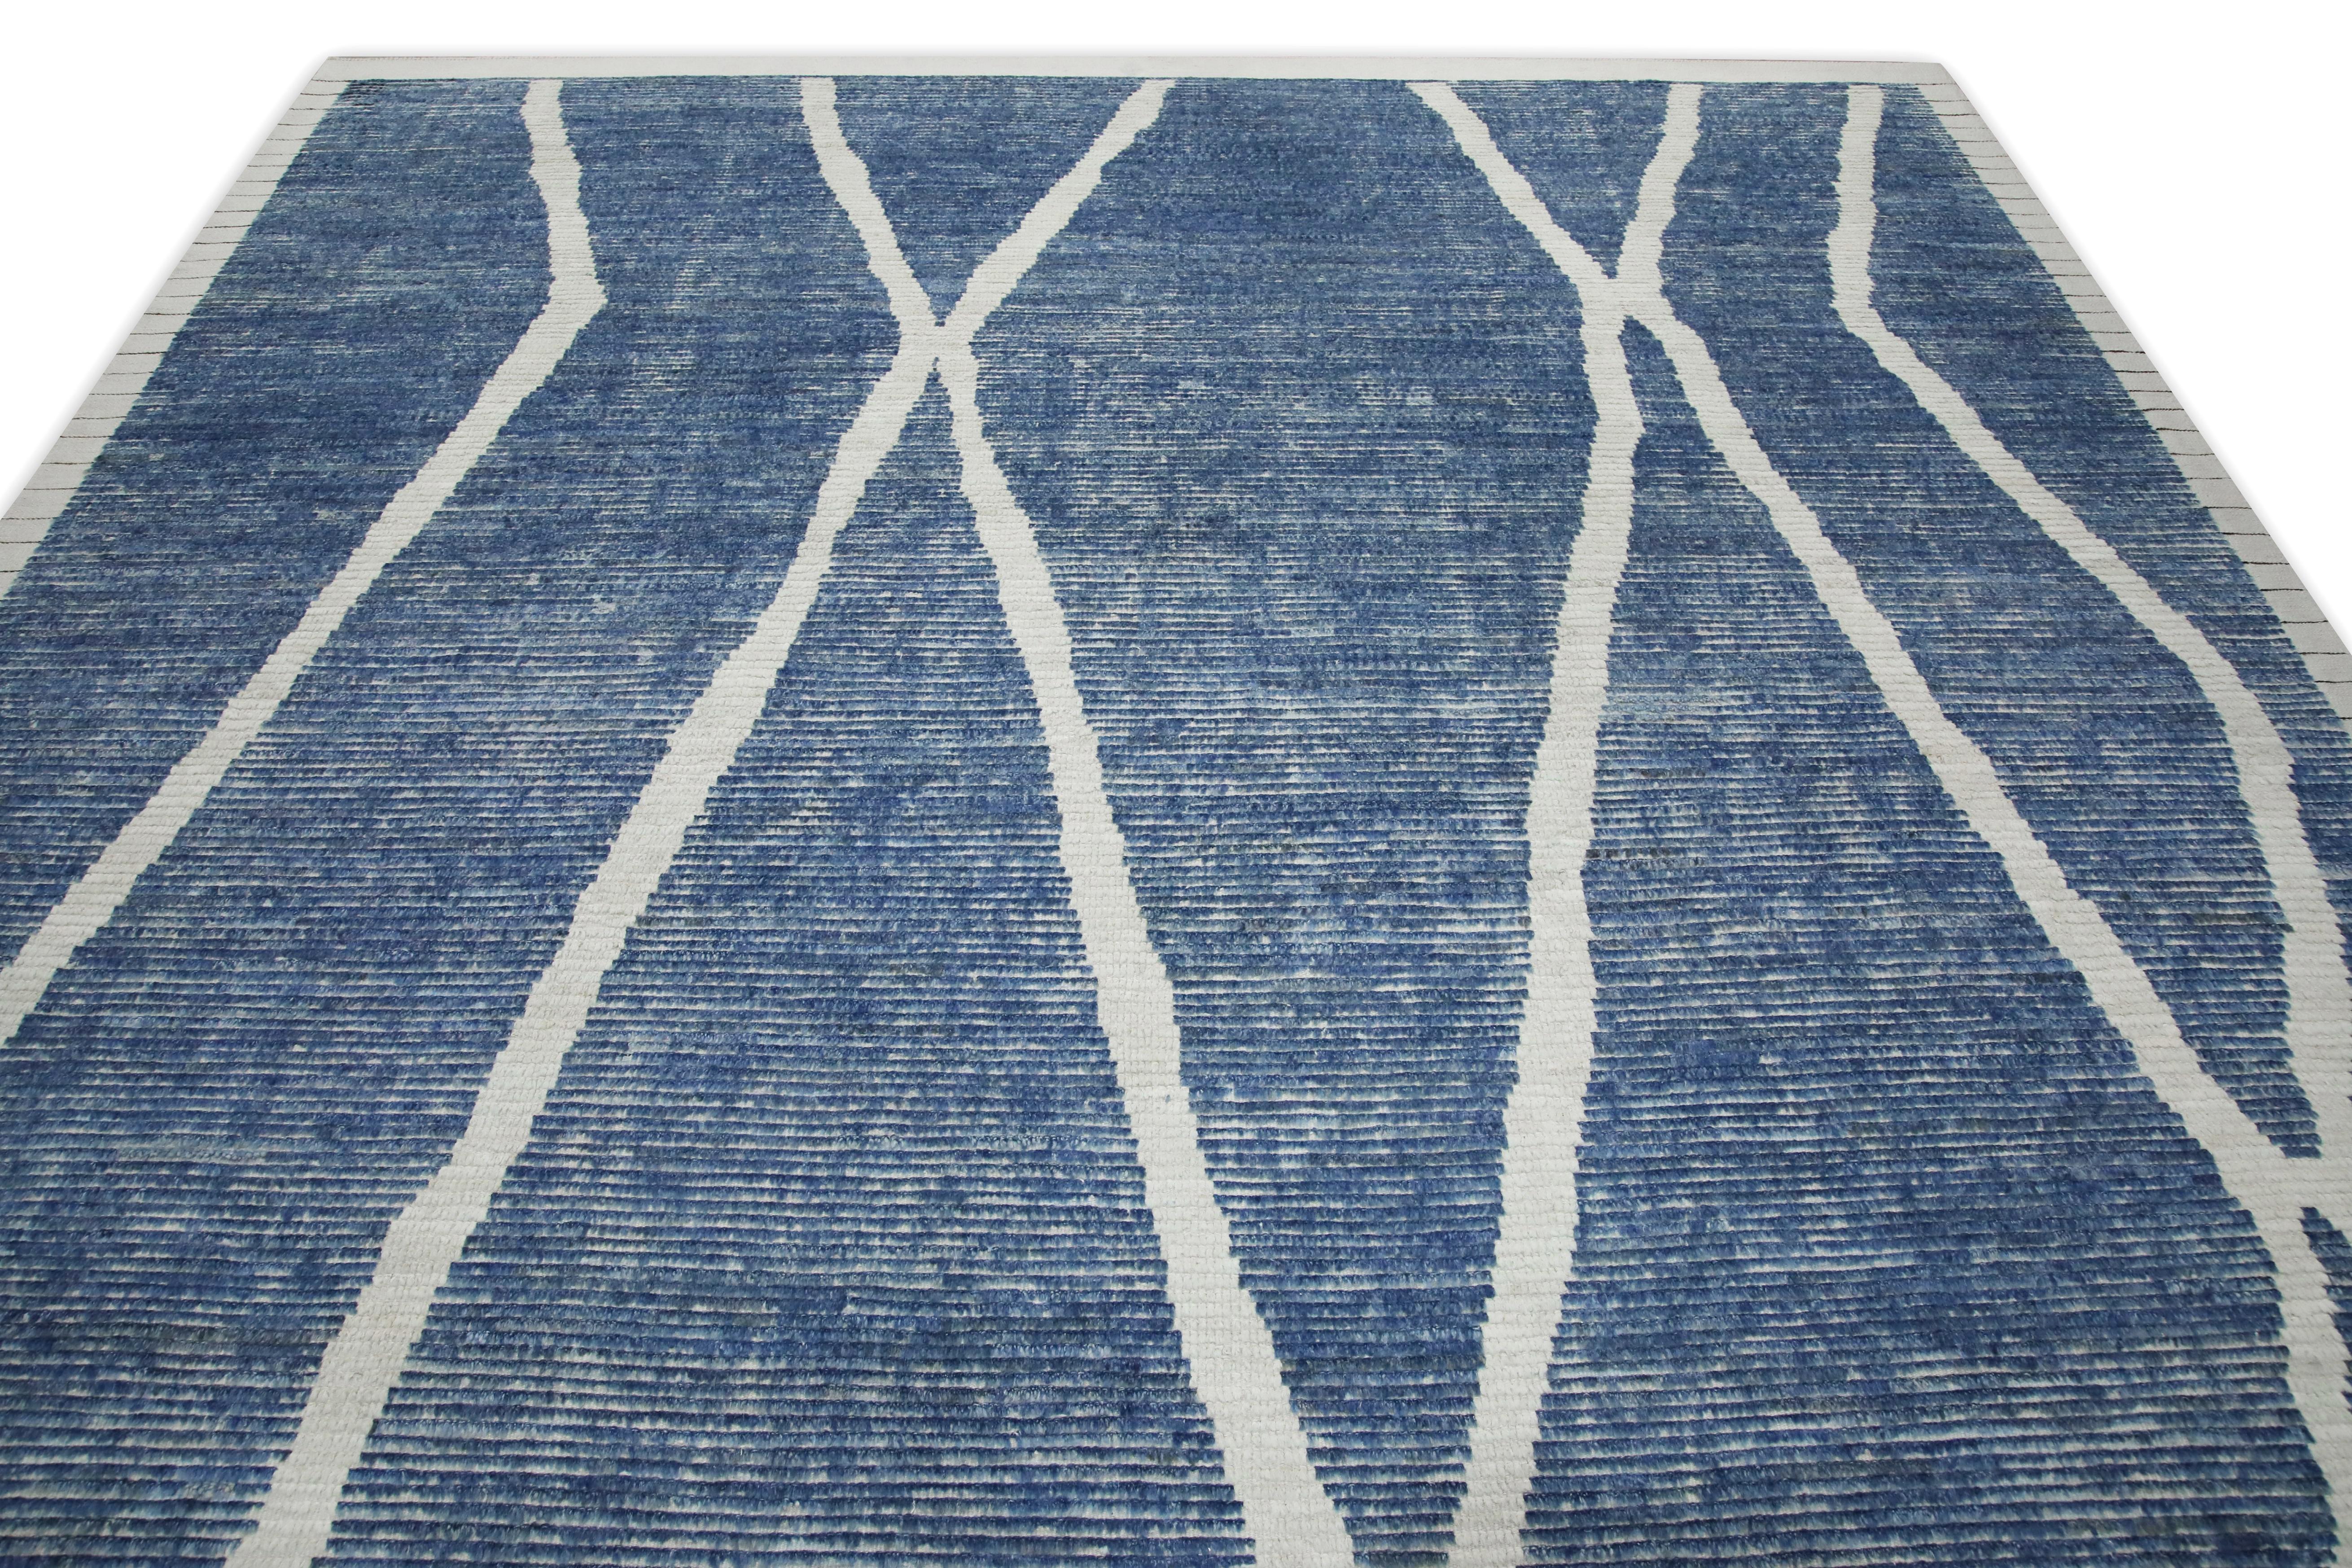 Vegetable Dyed Blue 21st Century Modern Moroccan Style Wool Rug 9'1